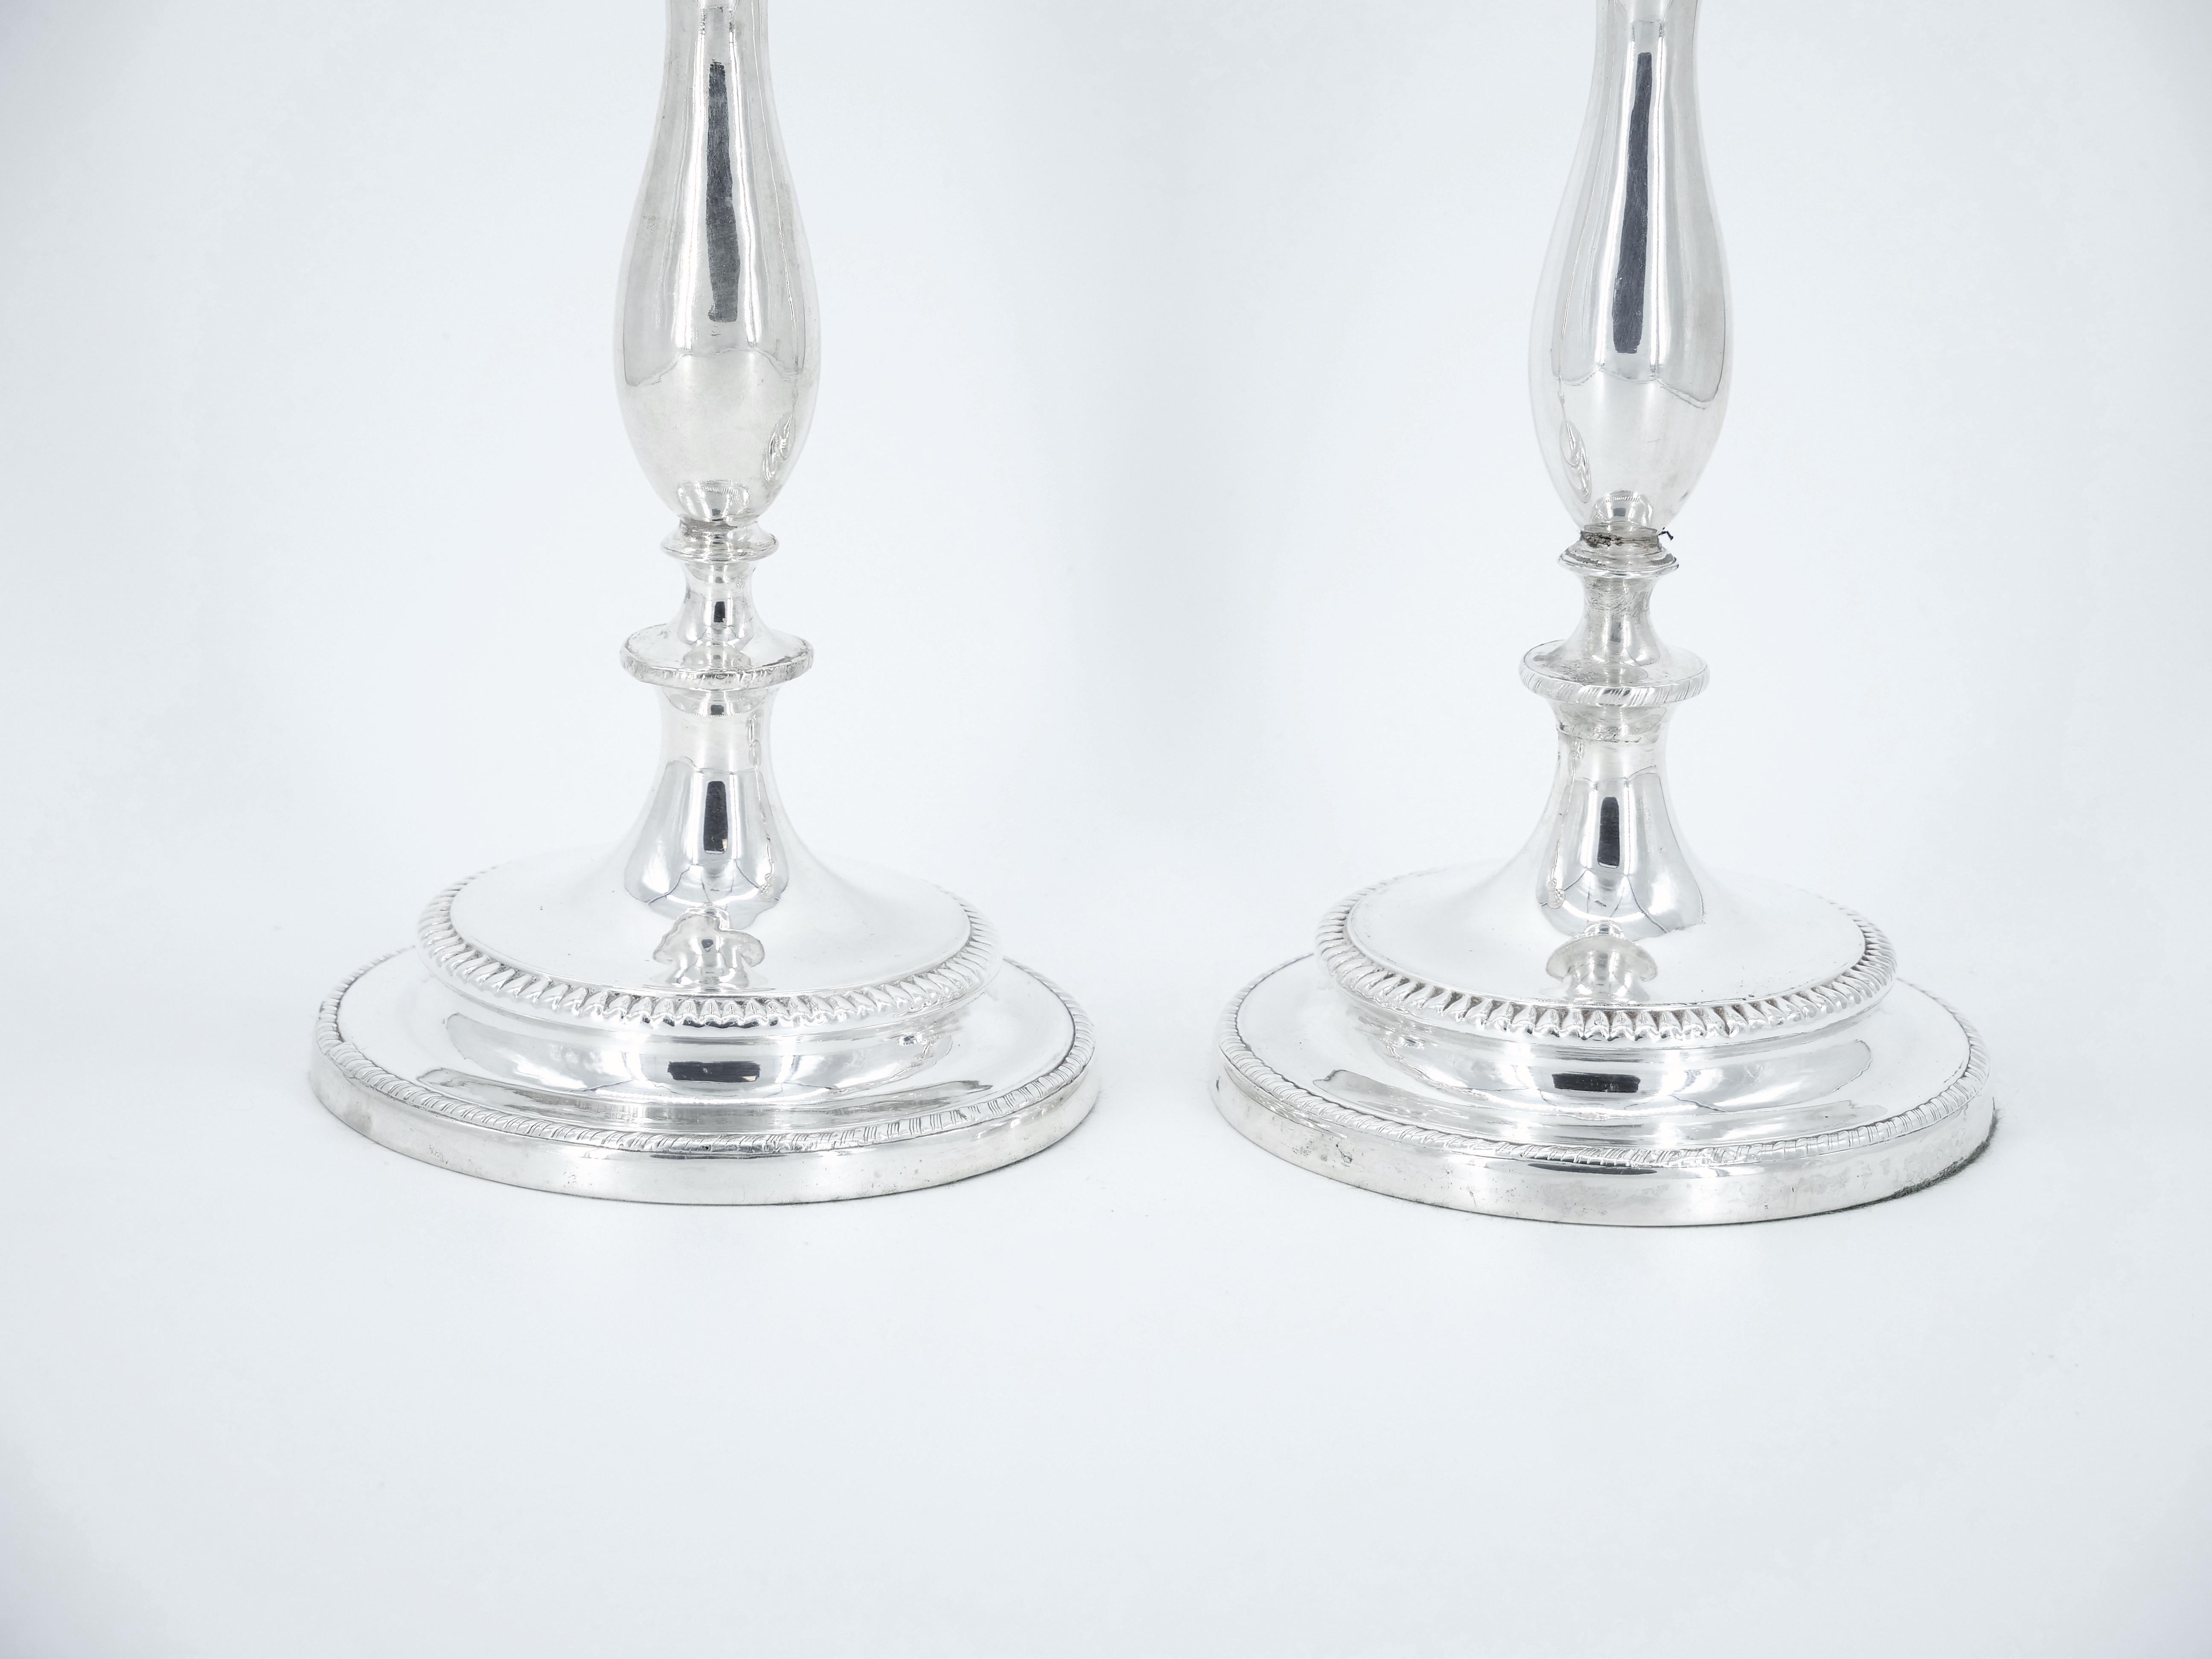 Pair English Regency Period Sheffield Plate Candlesticks circa 1800s For Sale 1